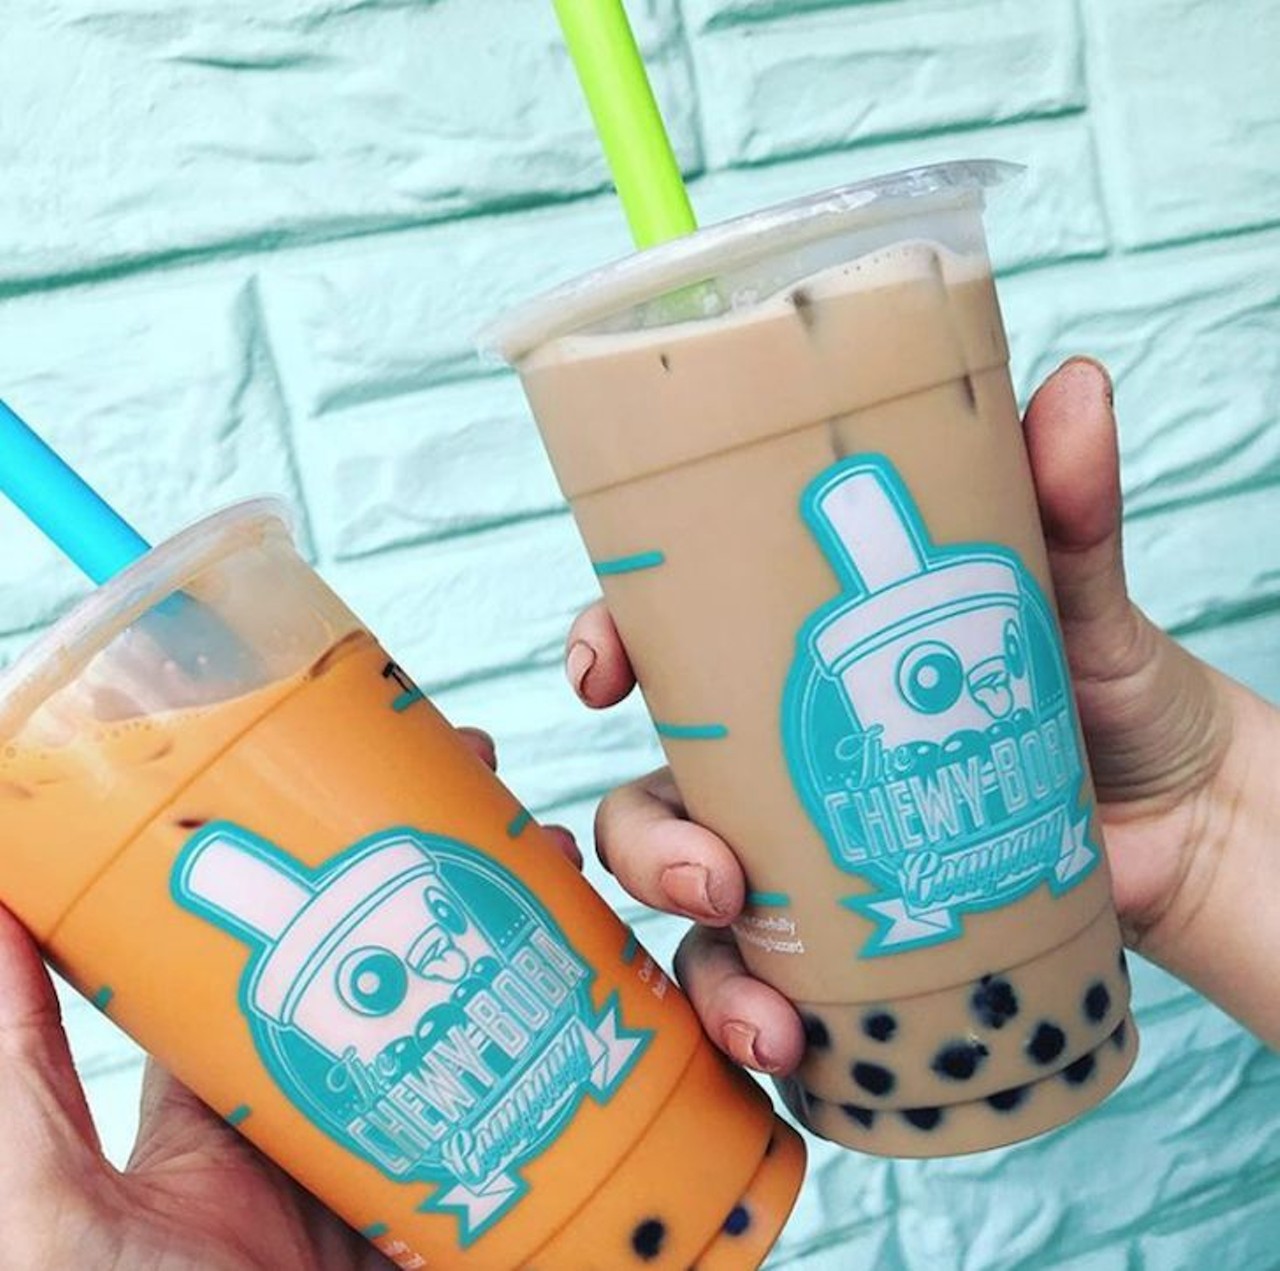 Chewy Boba
1212 E. Colonial Drive | 407-897-1377
Get your chew on with the plethora of bubble teas and boba at Chewy&#146;s. Taro is a fan favorite, but we think you should give the tropical paradise with banana, strawberry and mango or honeydew-avocado a taste. They've also got macarons of all flavors for mass crunching.
Photo via wildbinks/Instagram